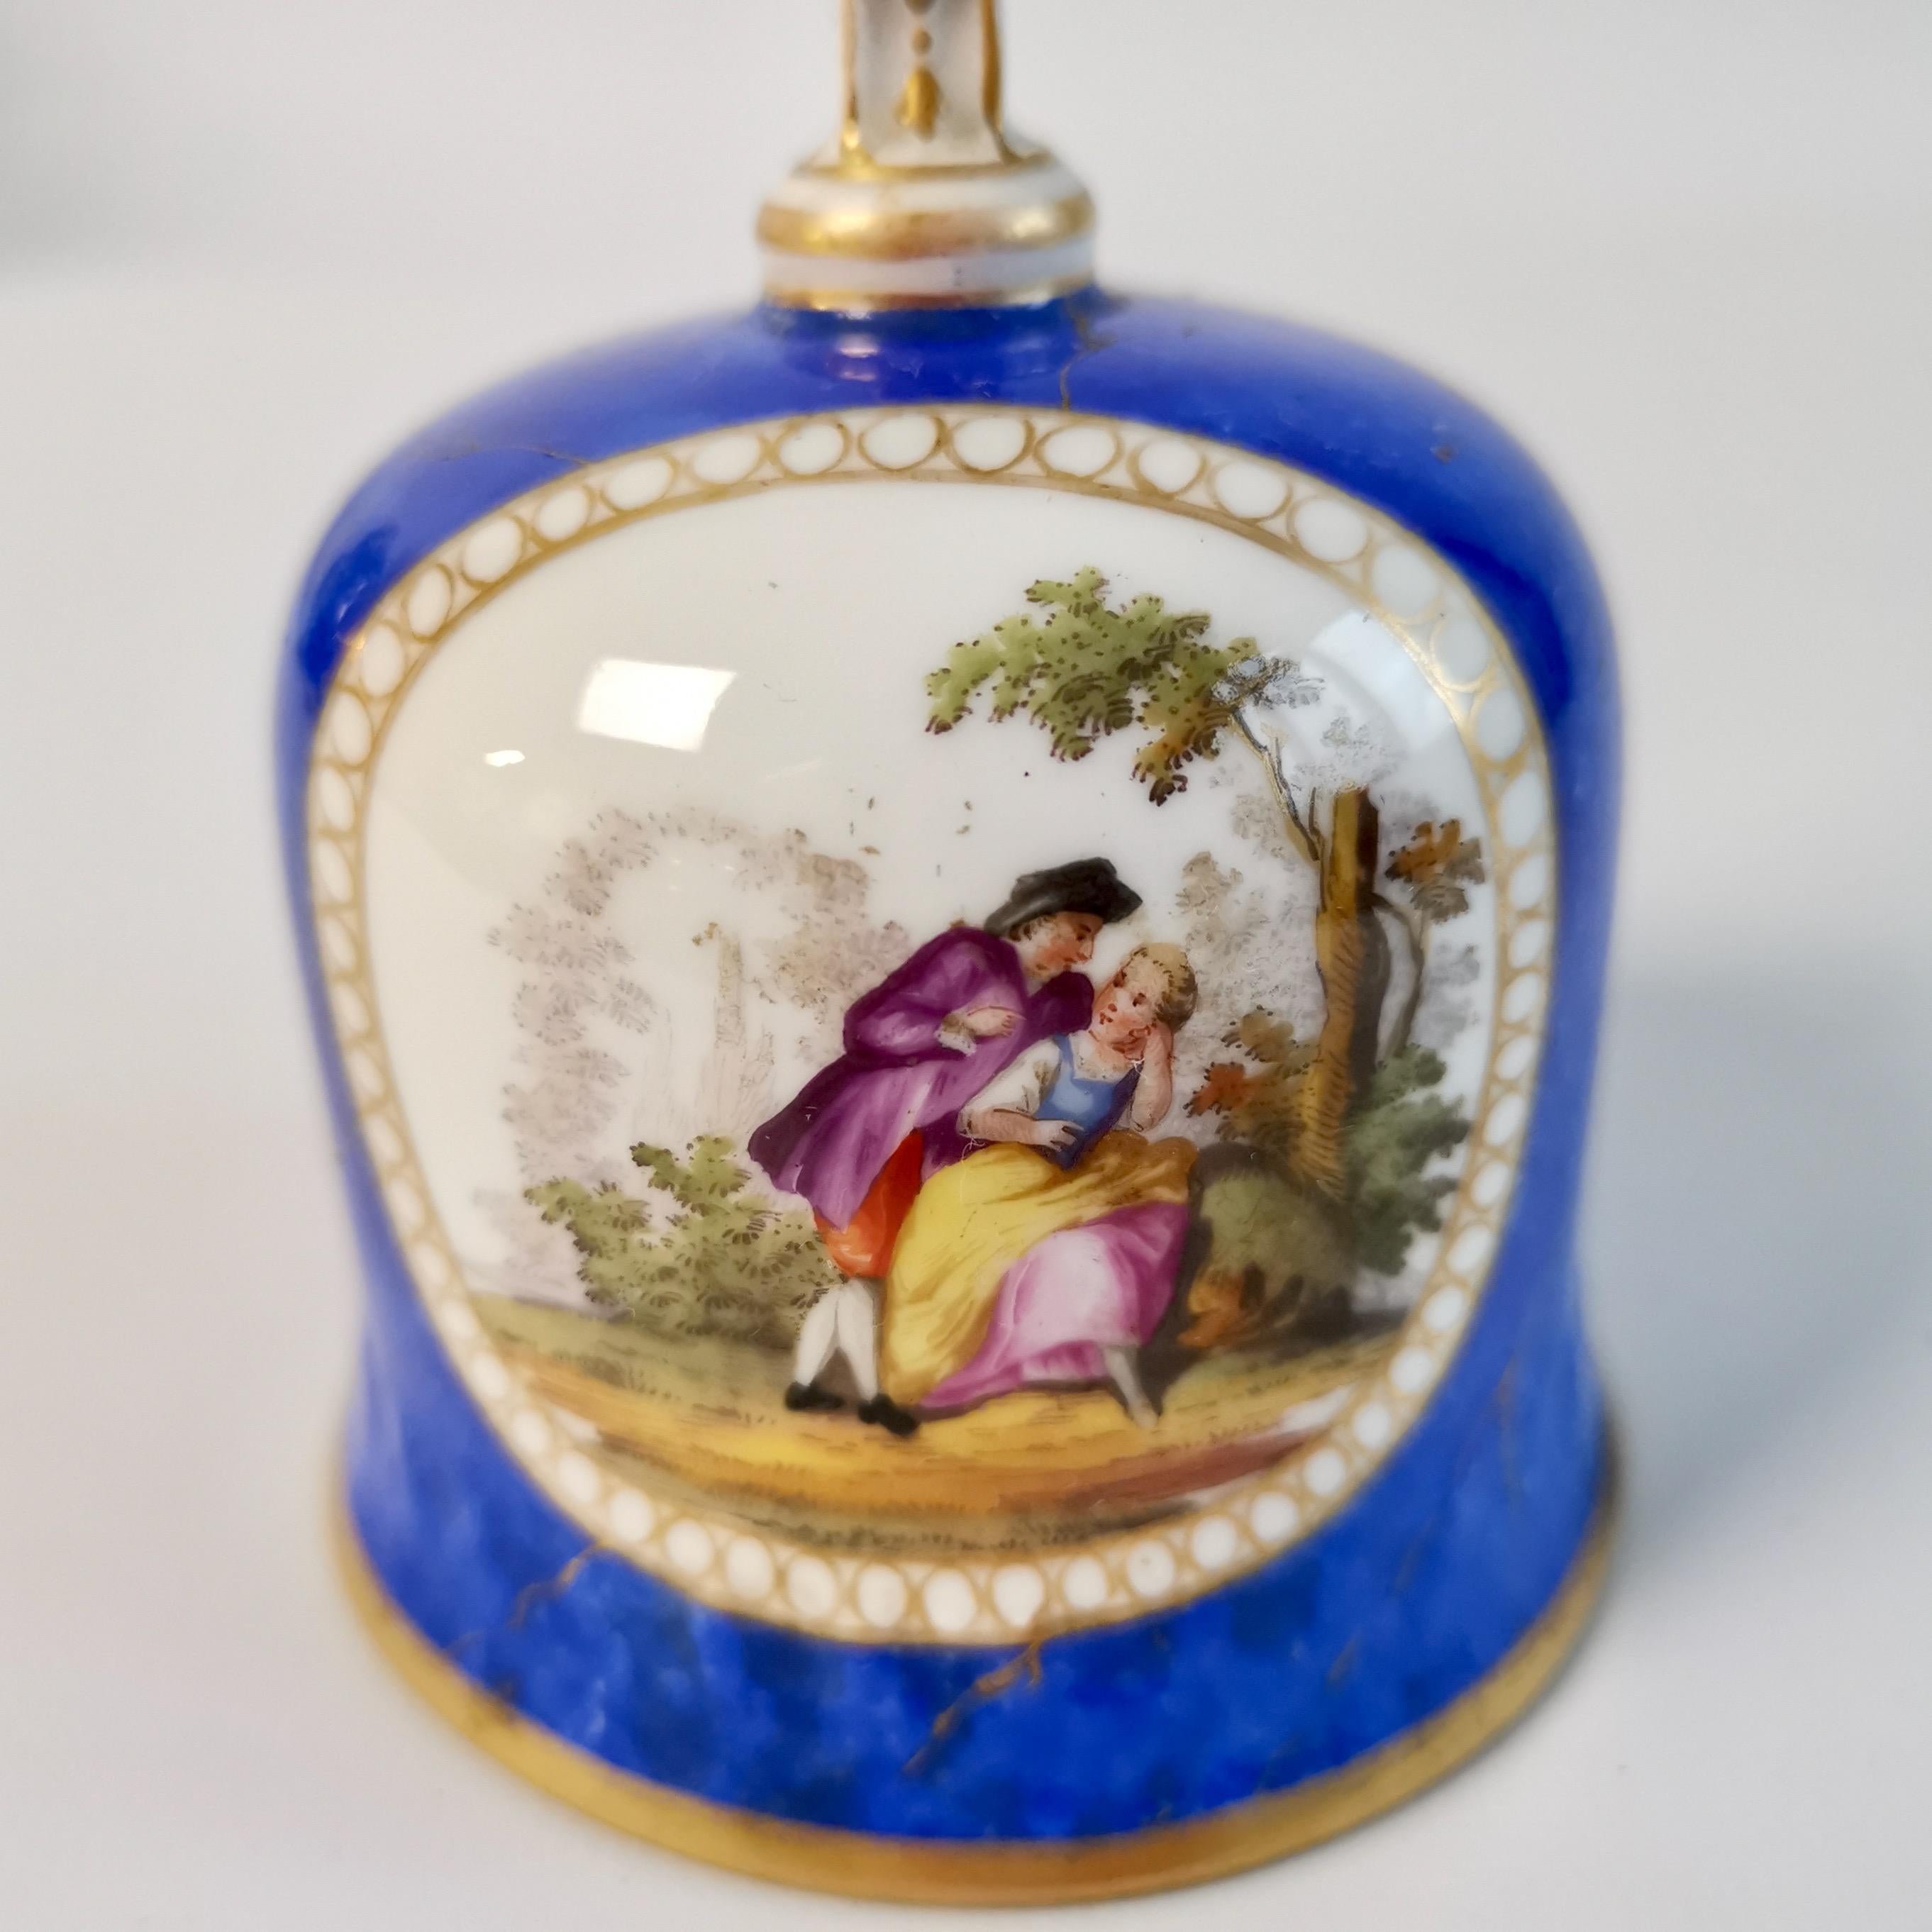 19th Century Meissen Porcelain Table Bell, Blue with Romantic Scenes, 19th C